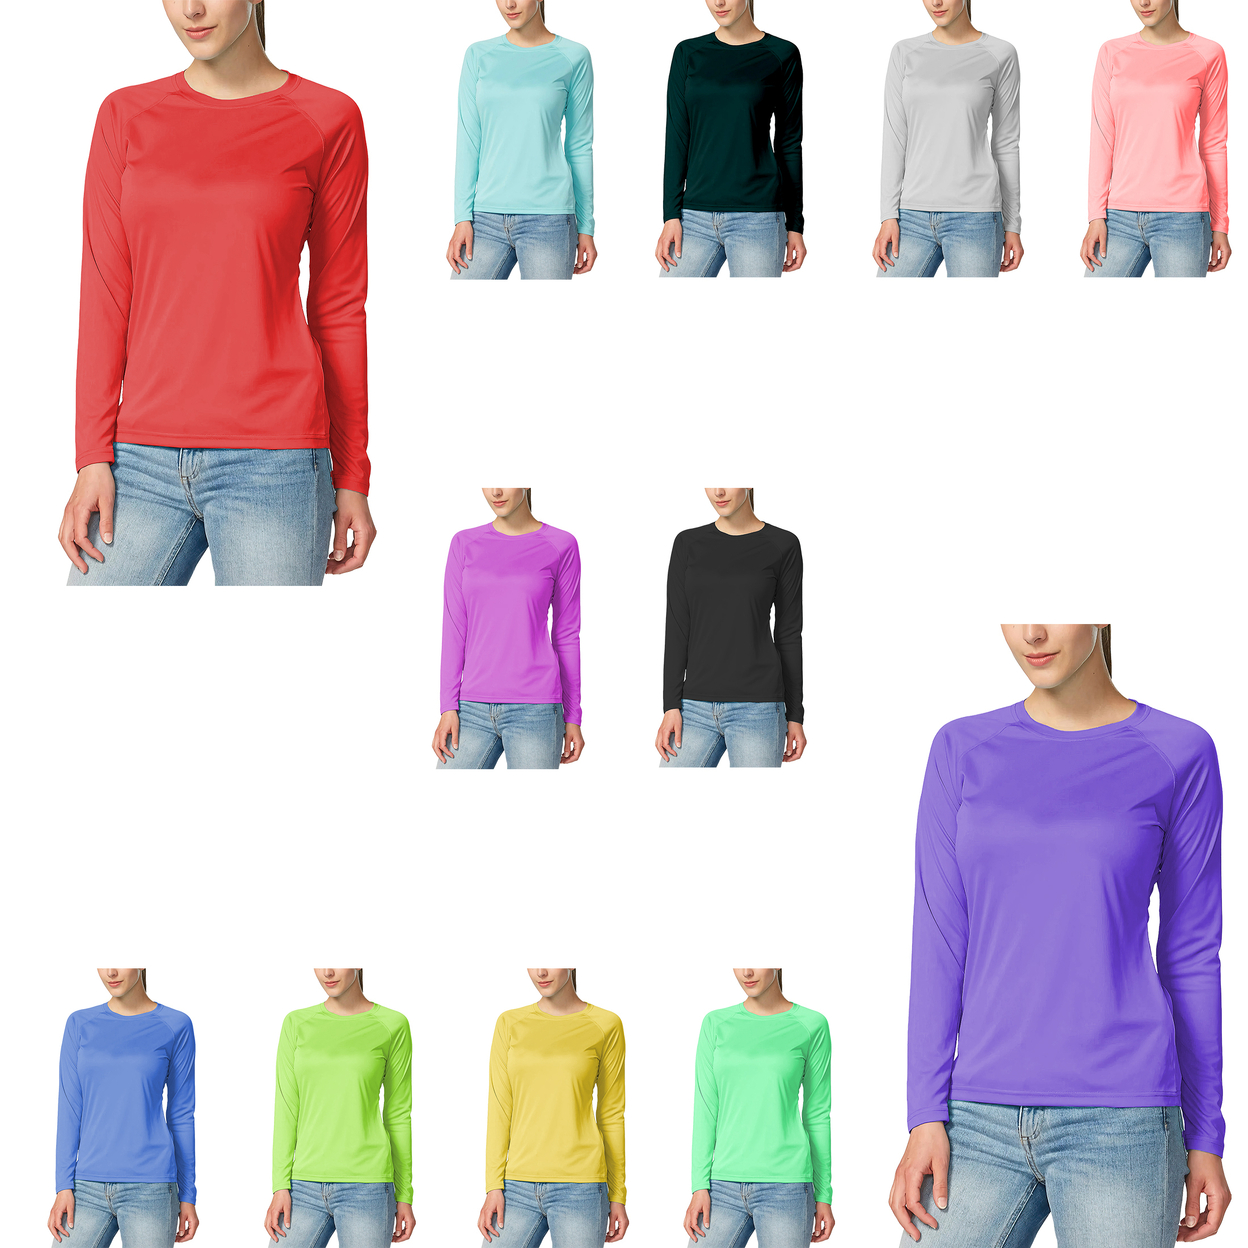 6-Pack: Women's Dri-Fit Moisture-Wicking Breathable Long Sleeve T-Shirt - X-large